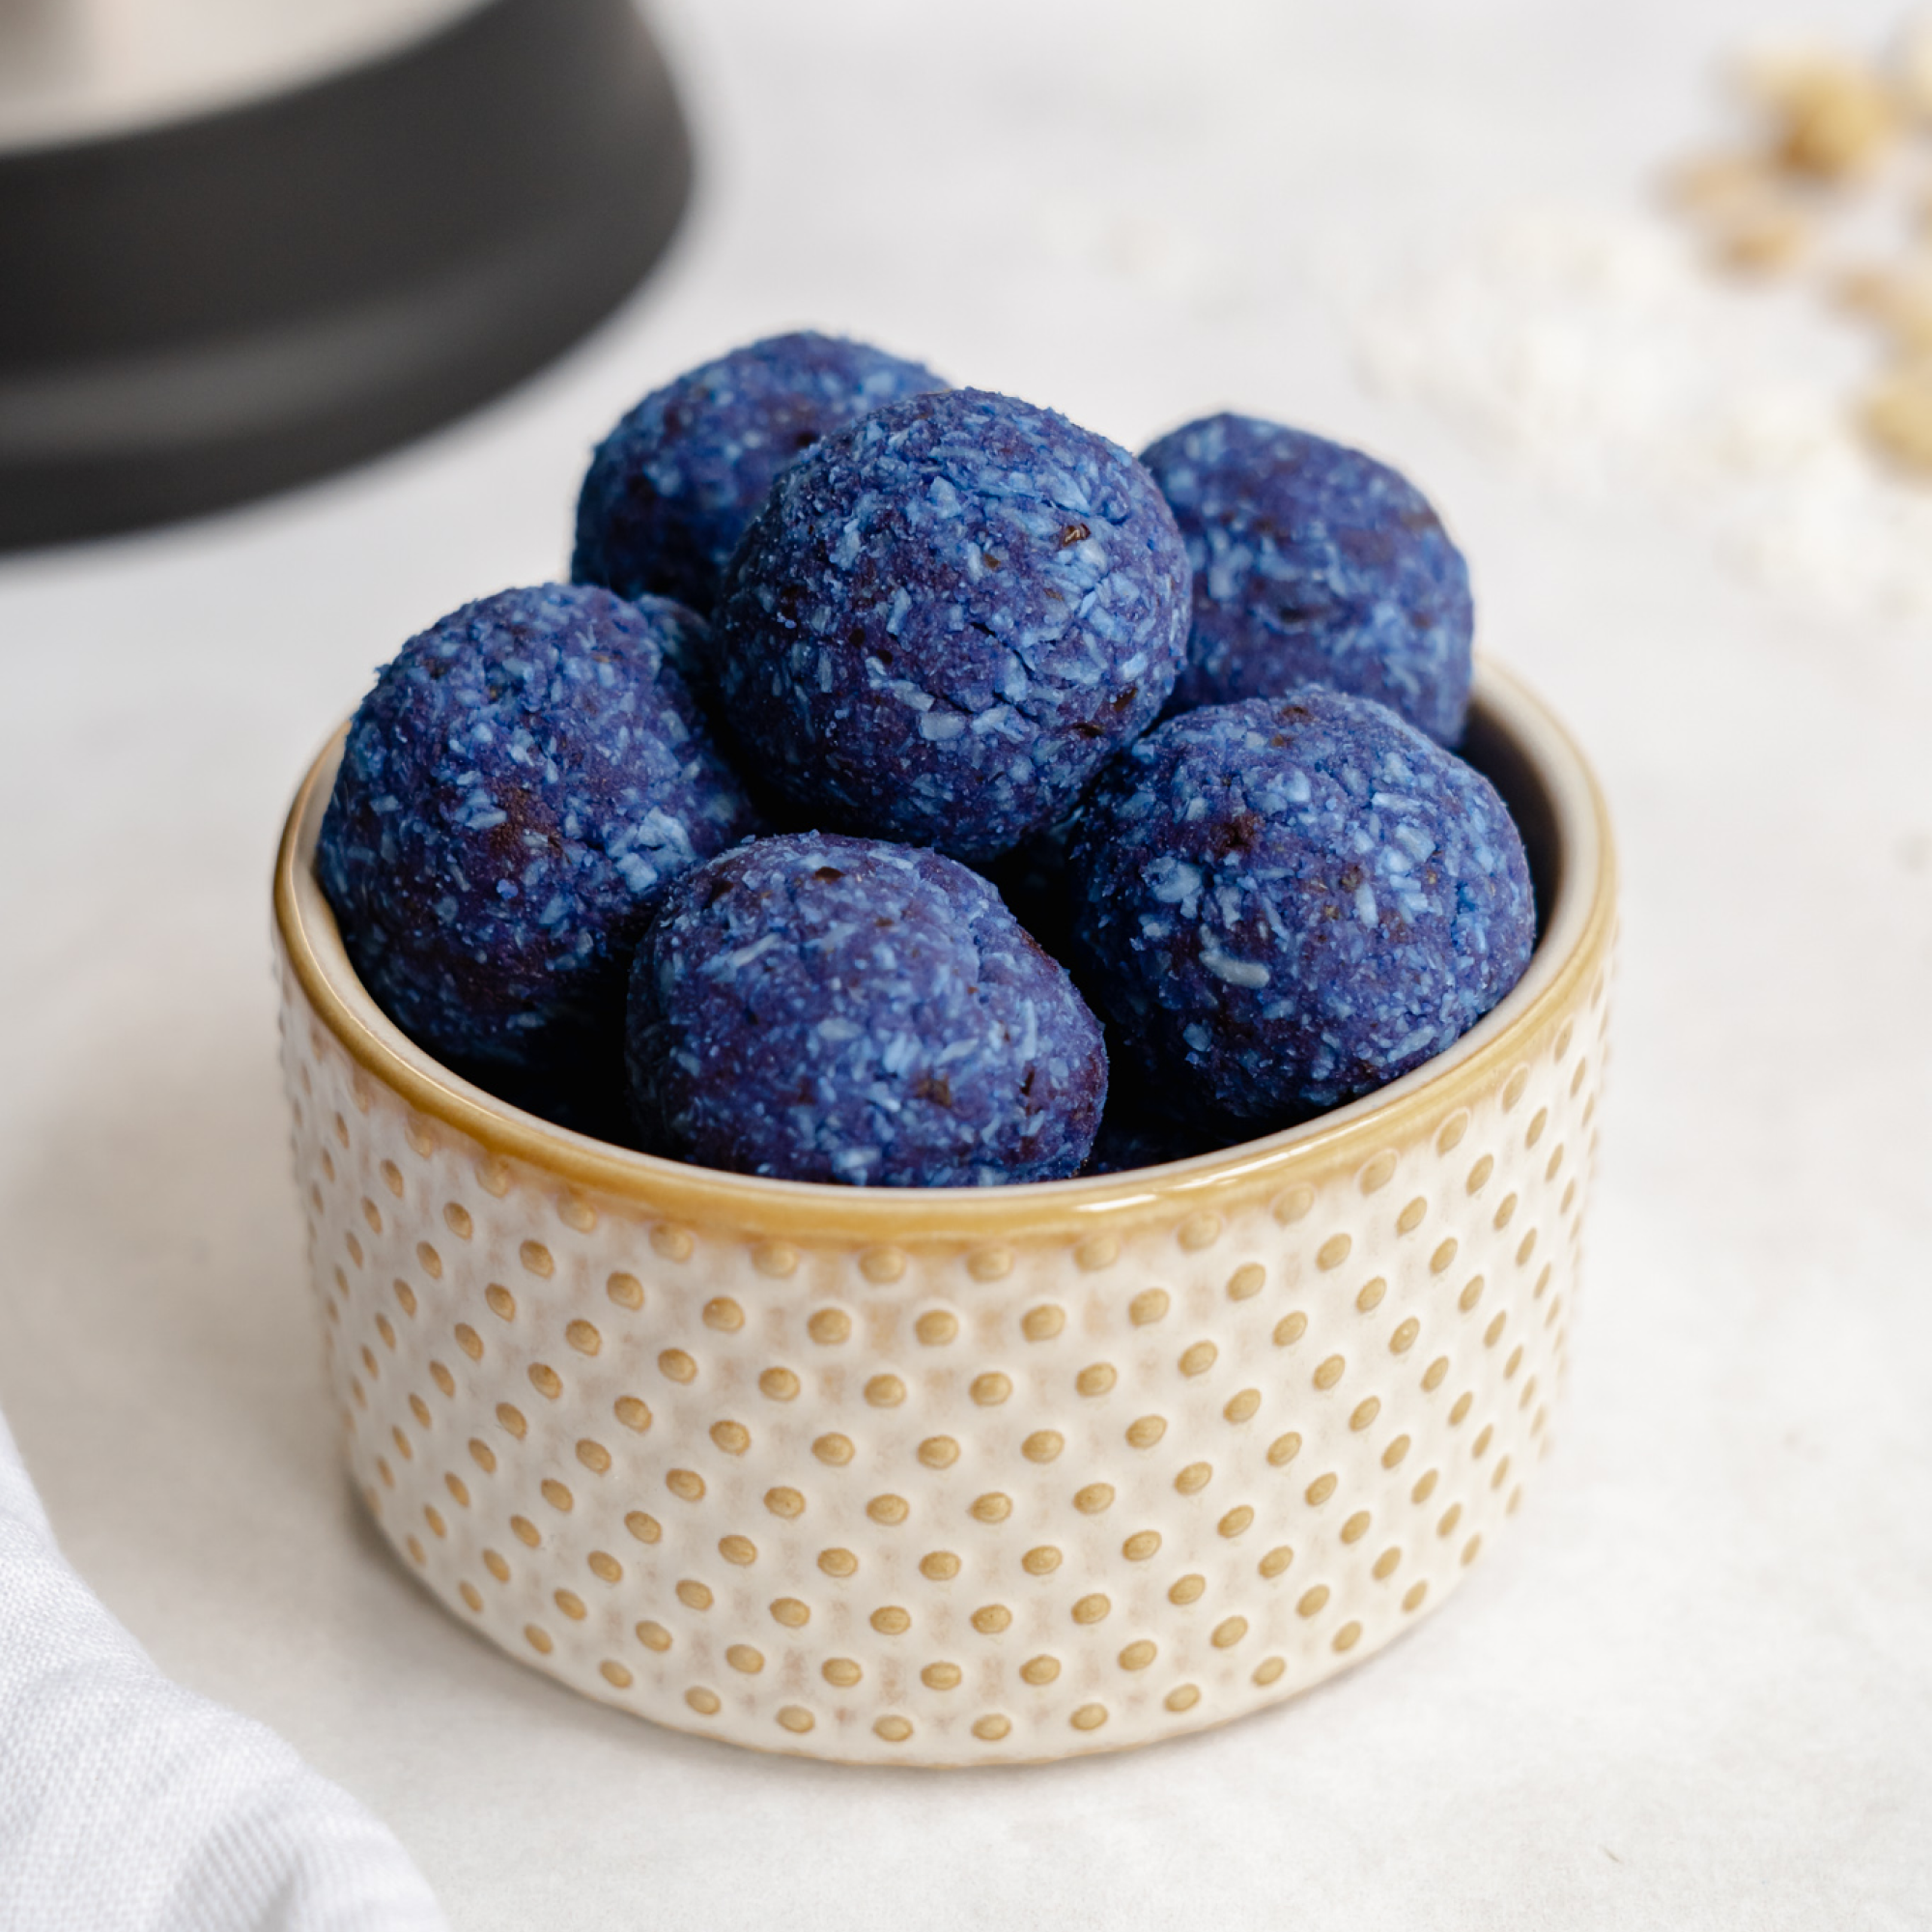 Blue Coconut Bliss Balls - A simple and quick snack made with Almond Cow milk machine